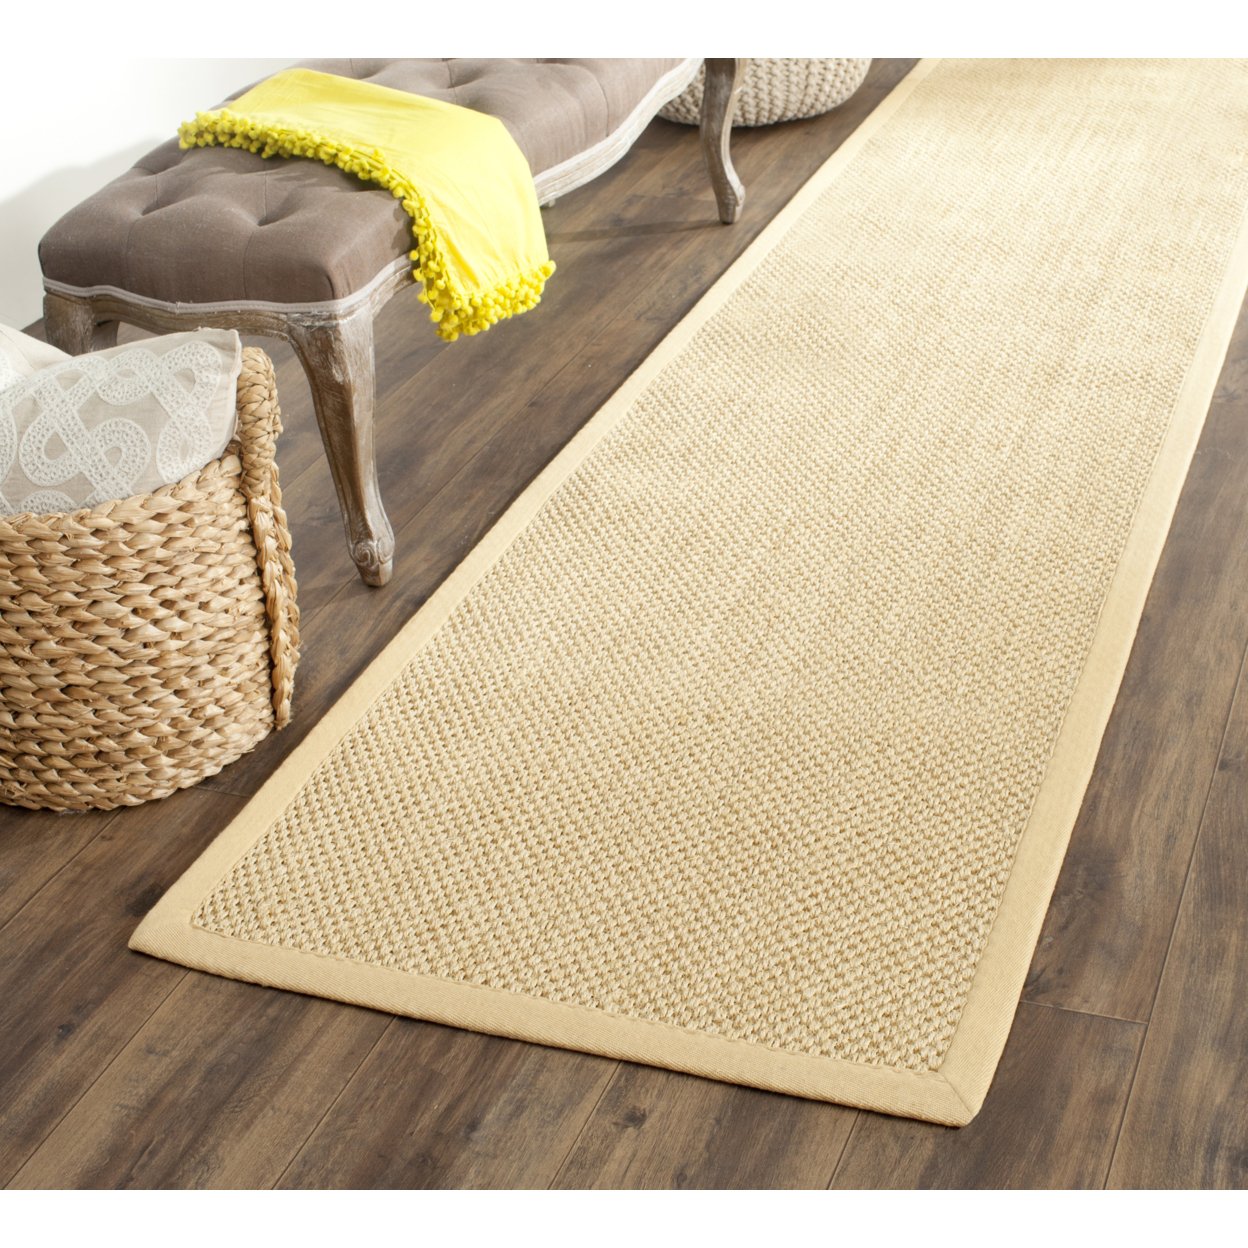 SAFAVIEH Natural Fiber Collection NF443A Maize/Wheat Rug - 4' X 6'